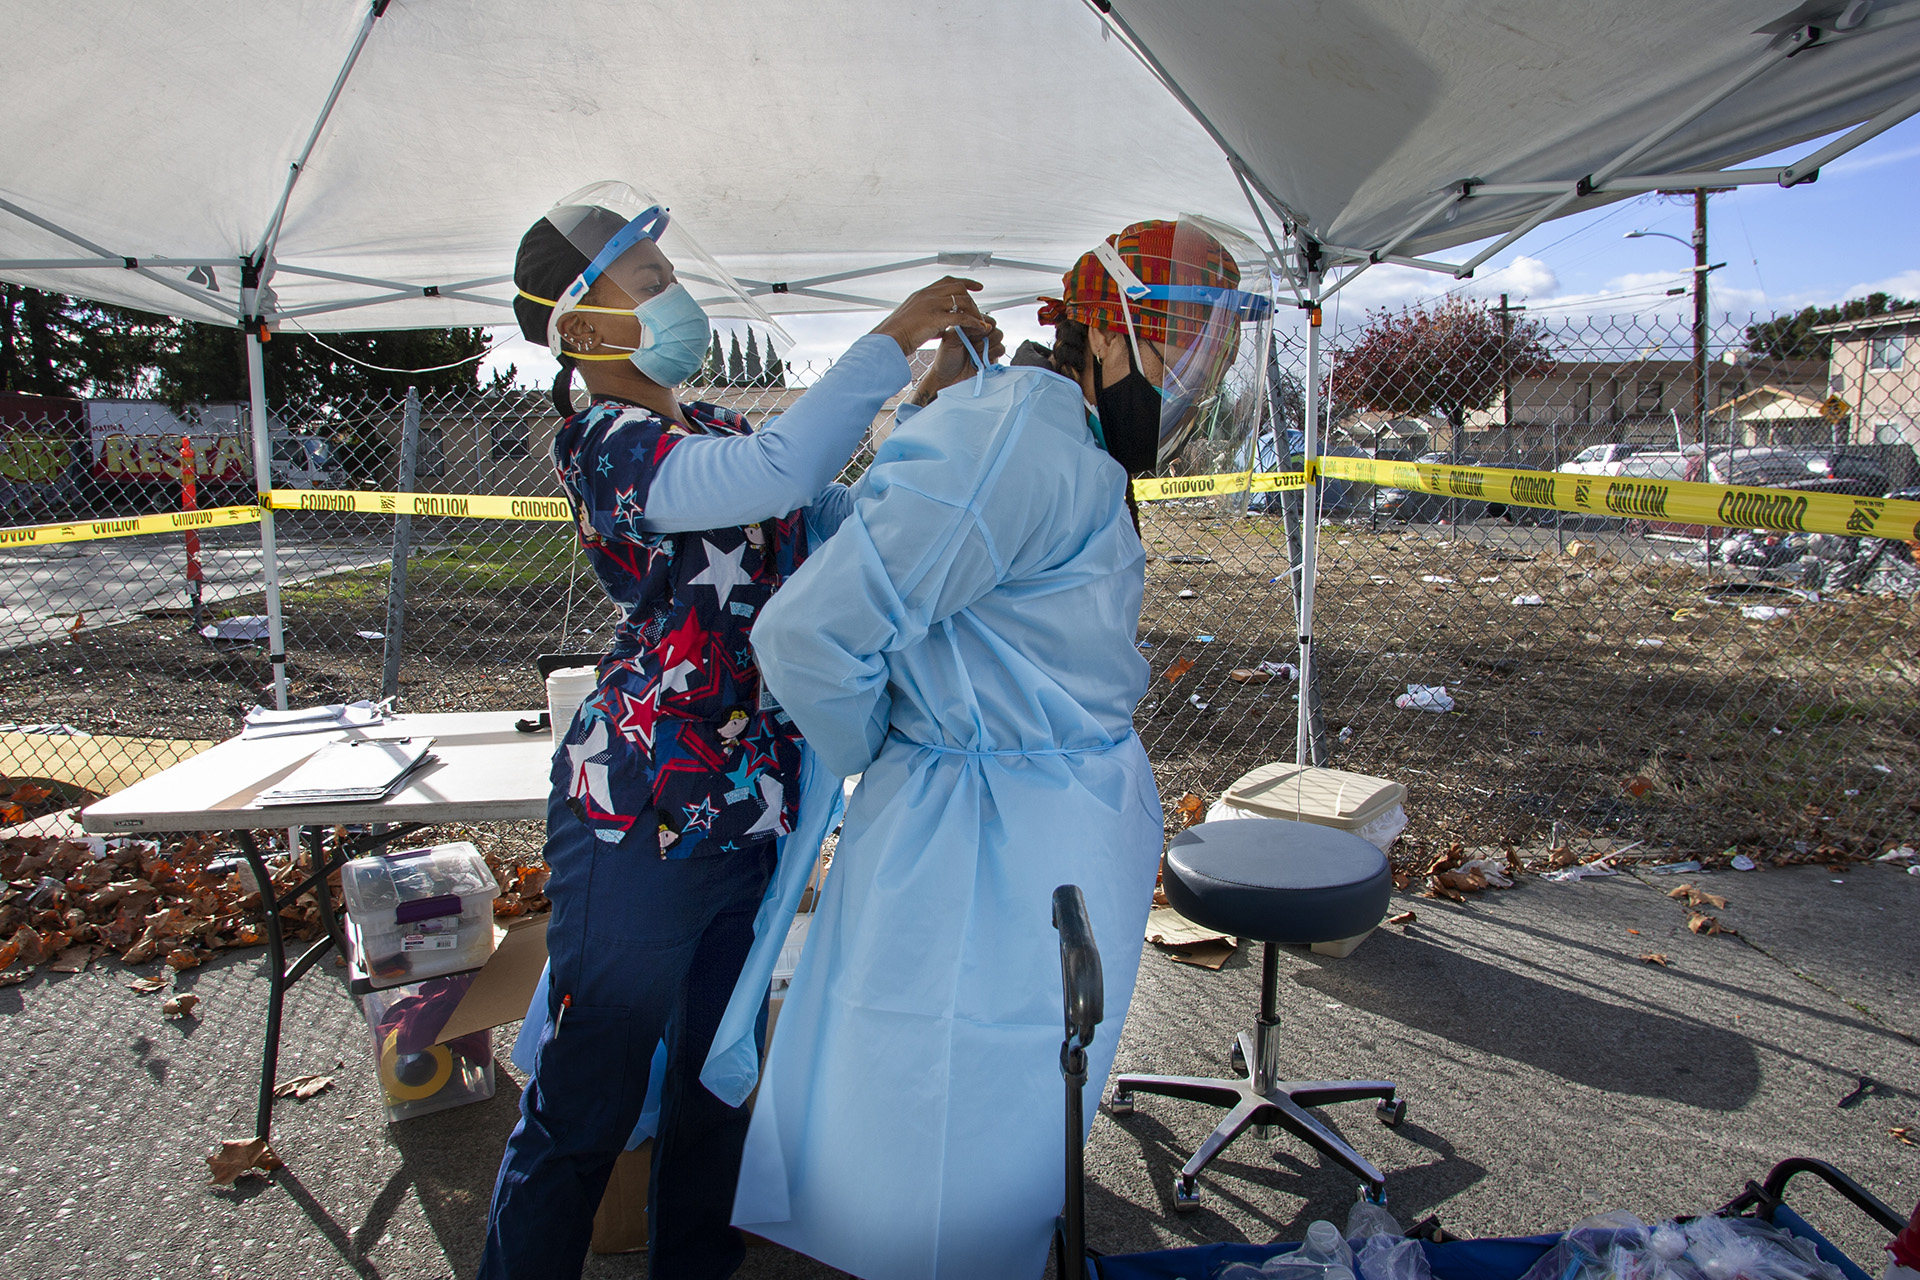 Maggie McNair, RN, at left, helps Danielle Williams, MD, at right into personal protective gear at a COVID-19 testing station in East Oakland as part of Roots Community Health Center's homeless outreach program.